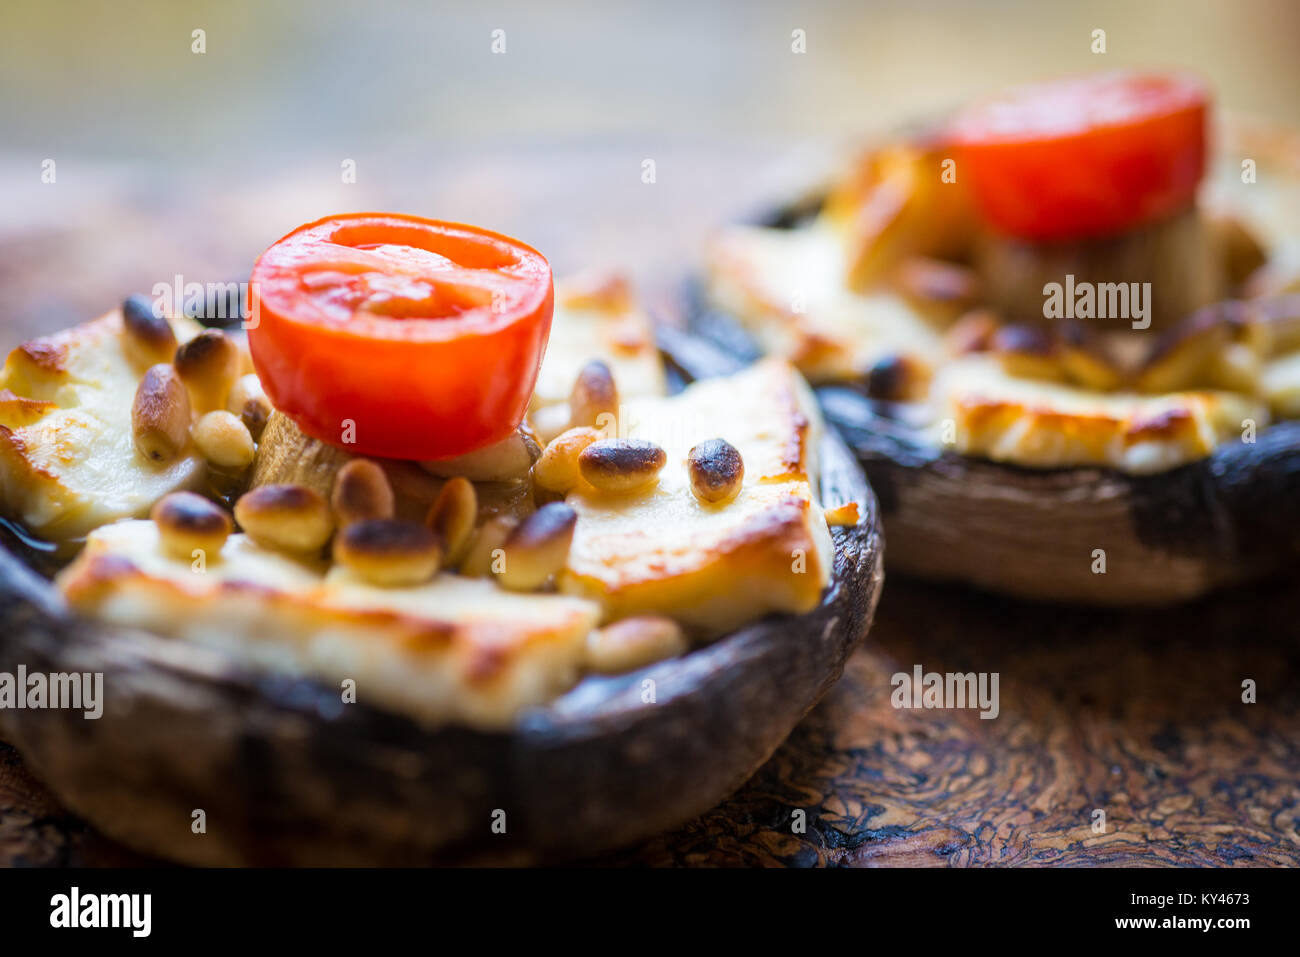 Tomato, halloumi cheese and pine nuts grilled on an inverted mushroom. Stock Photo